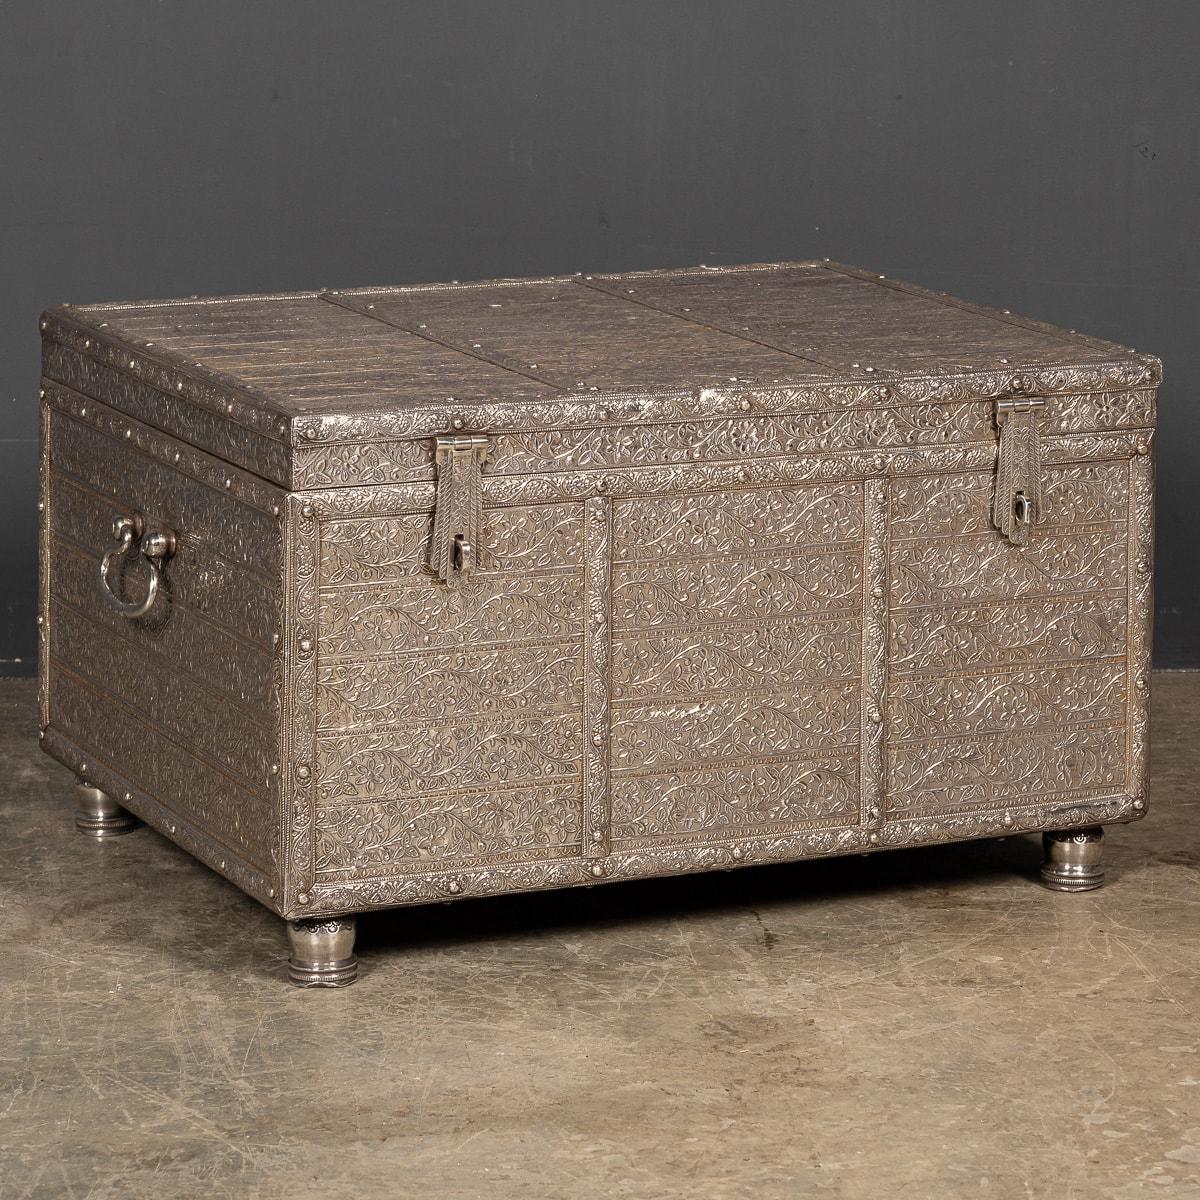 Antique 19th Century rare Indian Solid Silver treasure chest / casket, massive size, of rectangular form with hinged lid, foliate lock and hinged handles, profusely repousse' decorated with scrolling foliage throughout on a matted ground, the